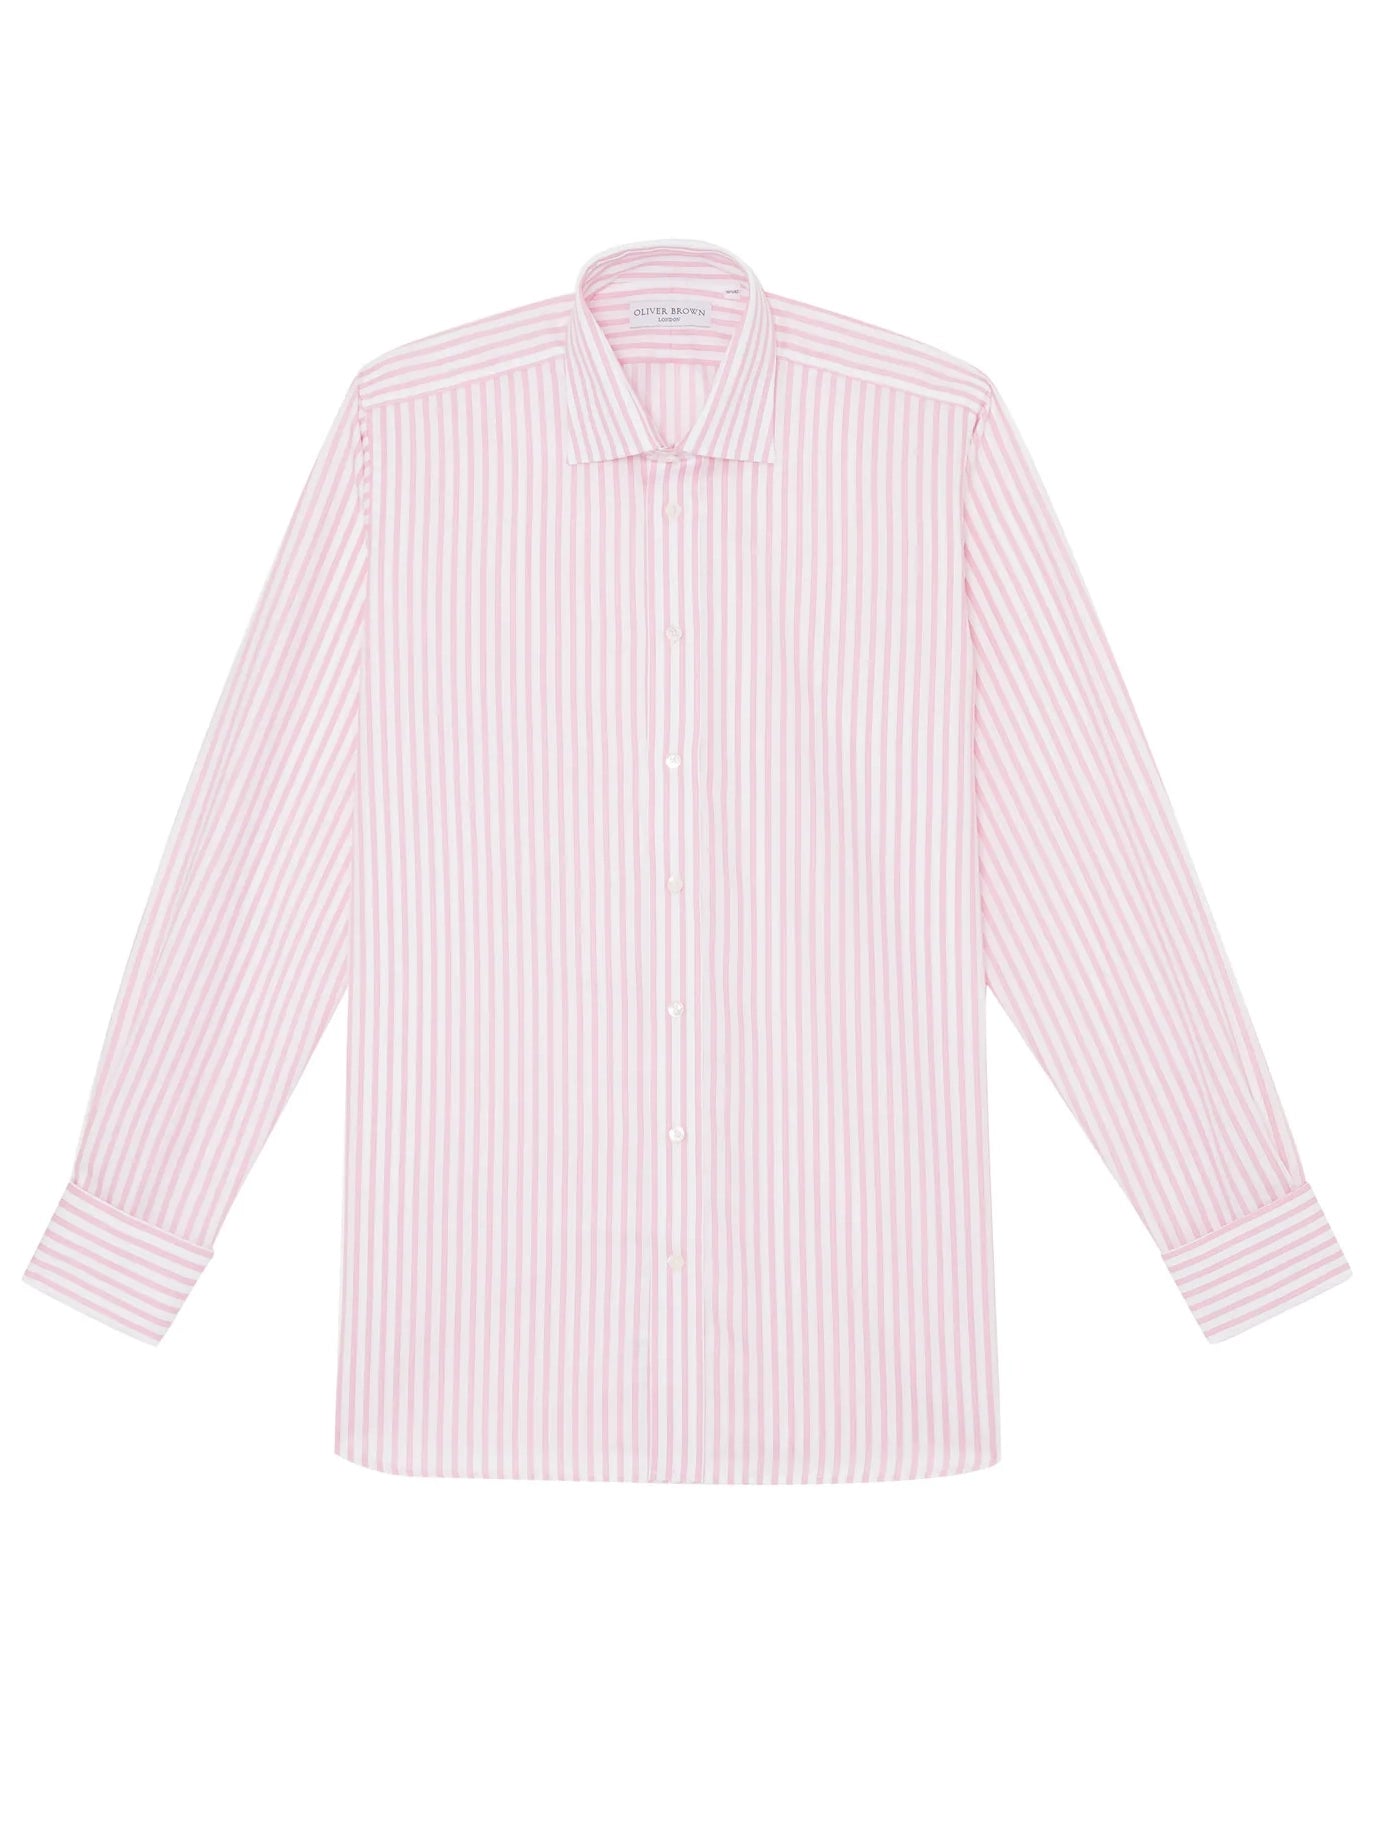 Cocktail Shirt - Oxford Striped Pink